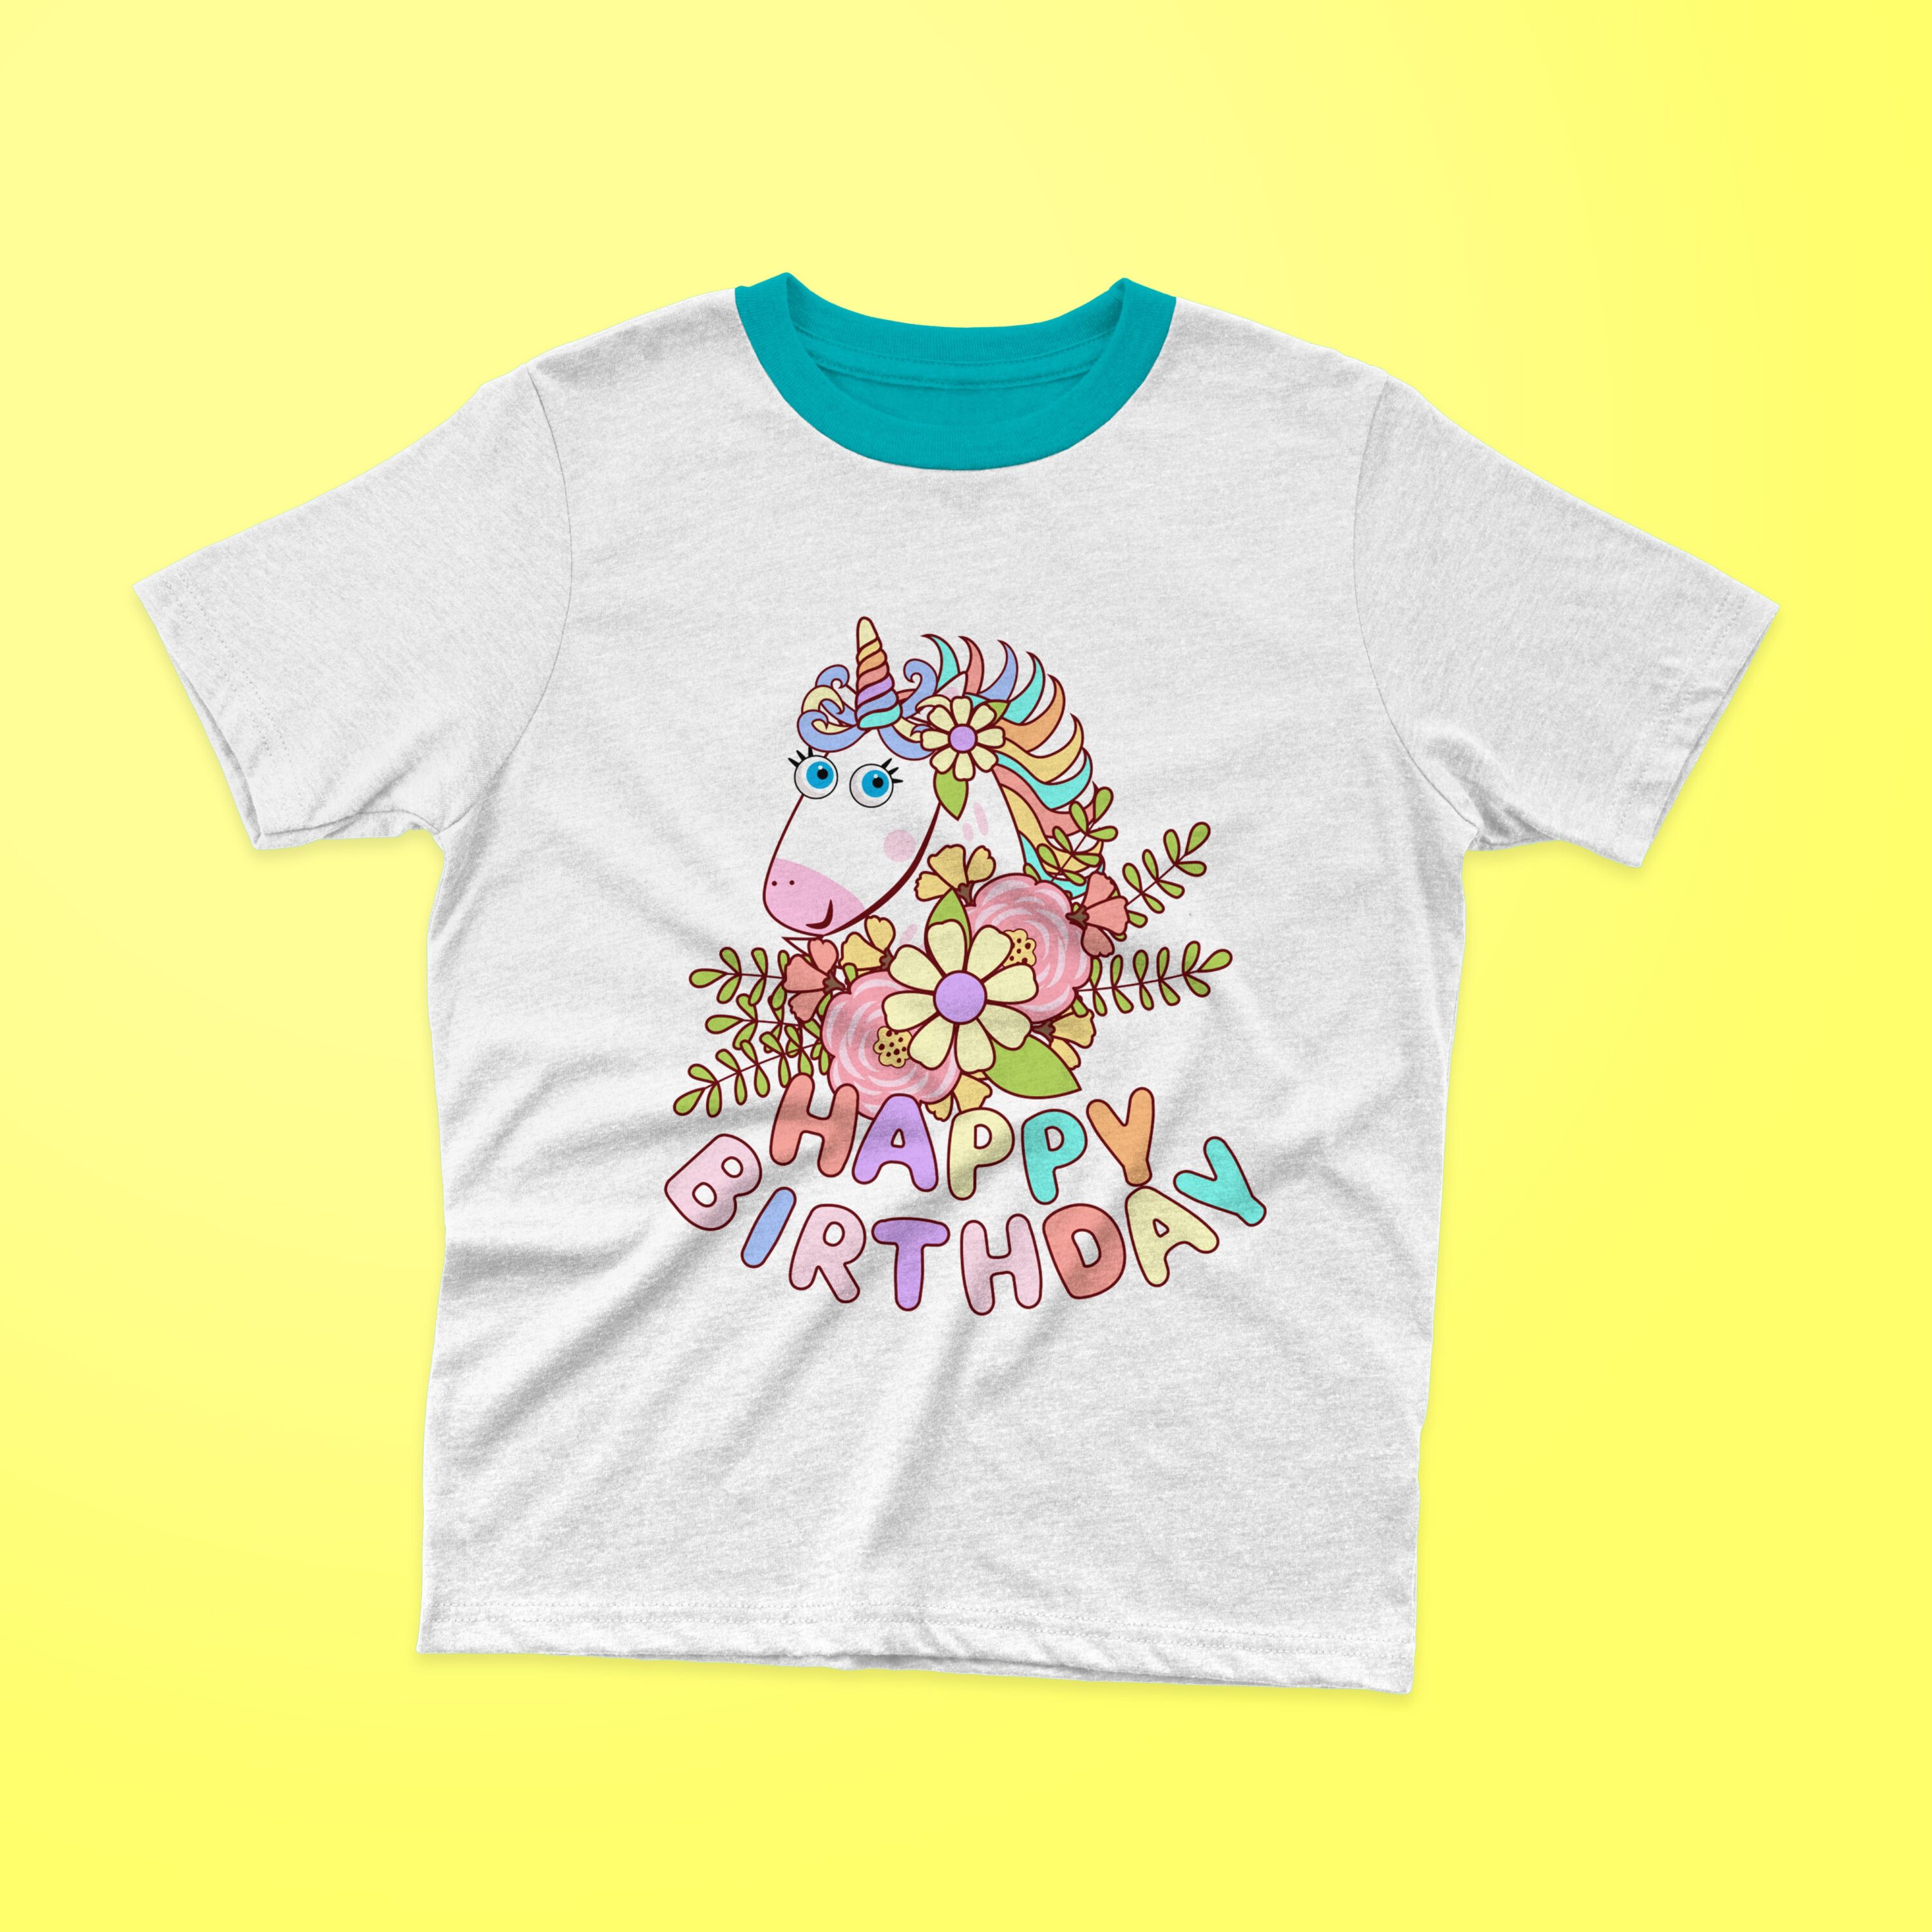 White t-shirt with a turquoise collar and a cute unicorn with colorful lettering "HAPPY BIRTHDAY" on a yellow background.